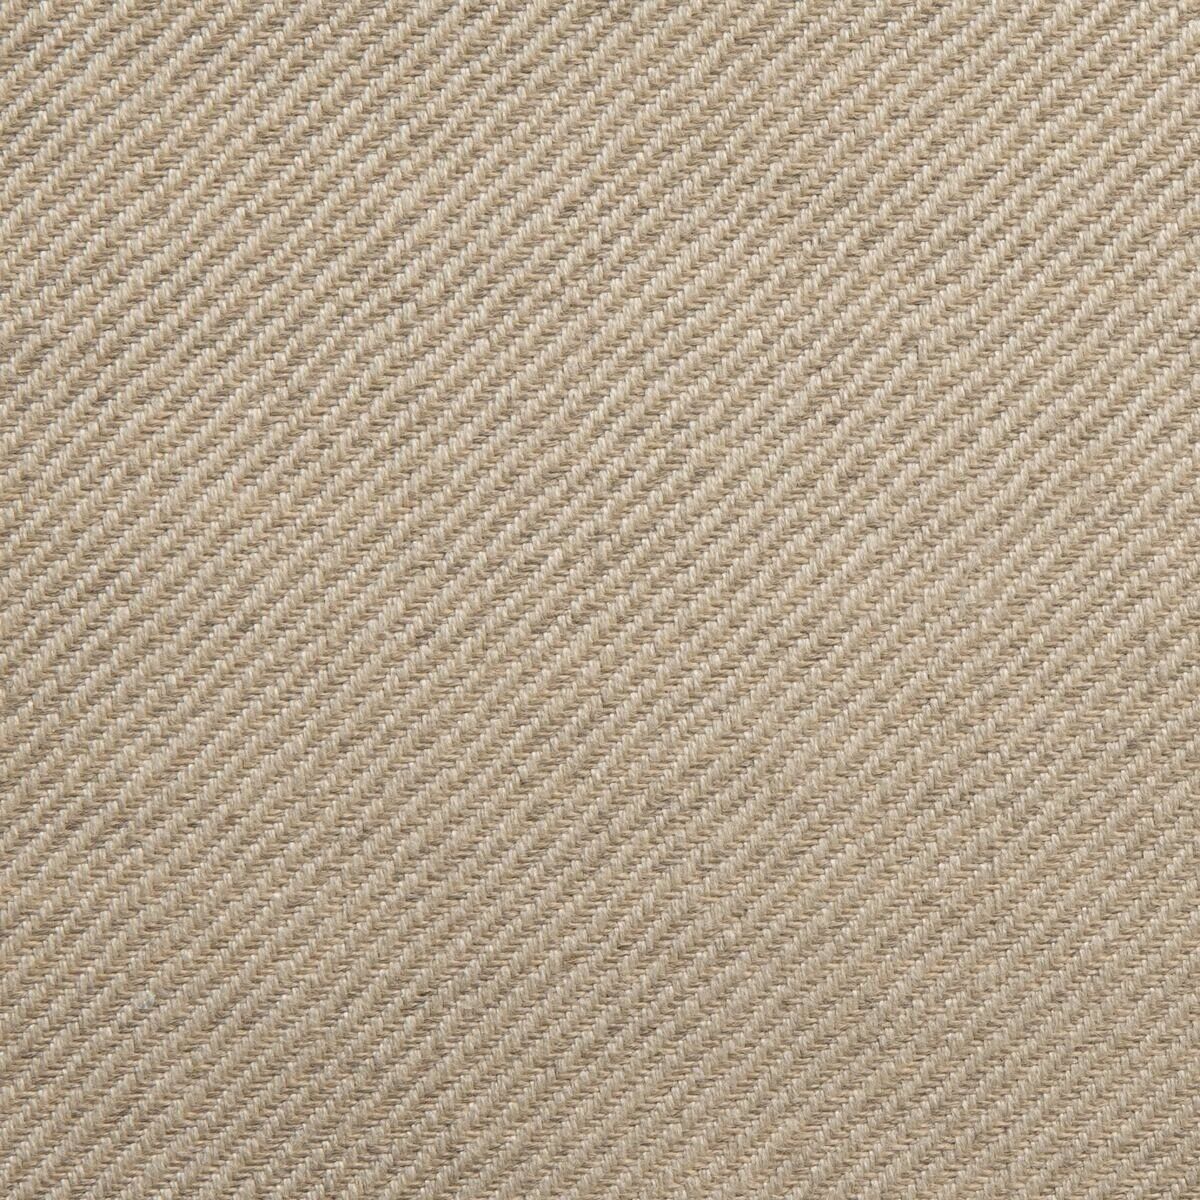 Holly Hunt Outdoor Upholstery Fabric- Across The Horizon Wet Sand 3.90 yd 207/02